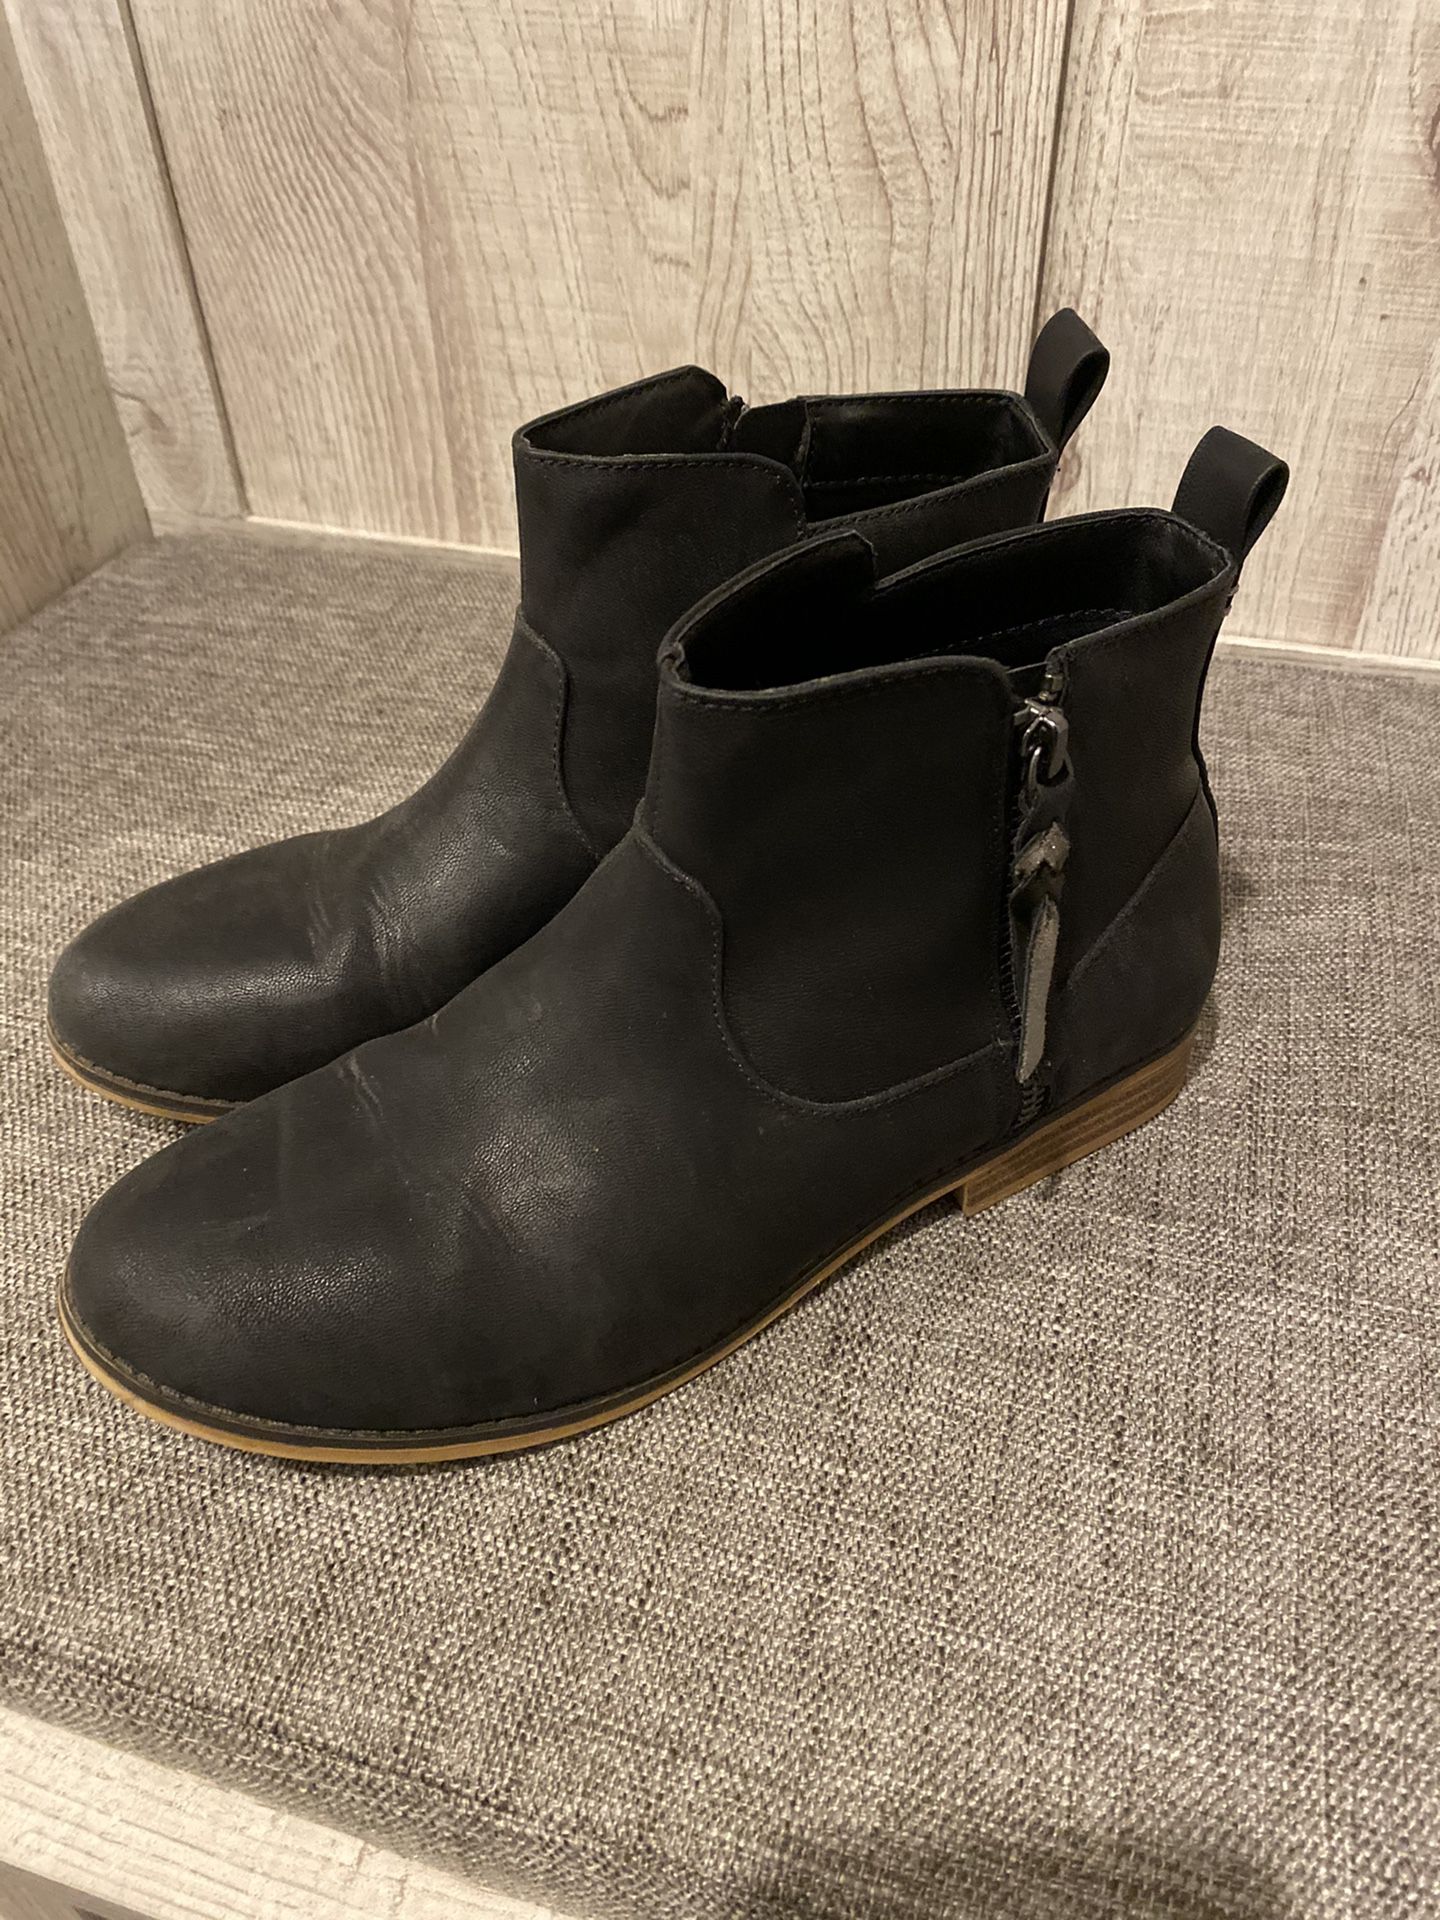 Youth girls boots